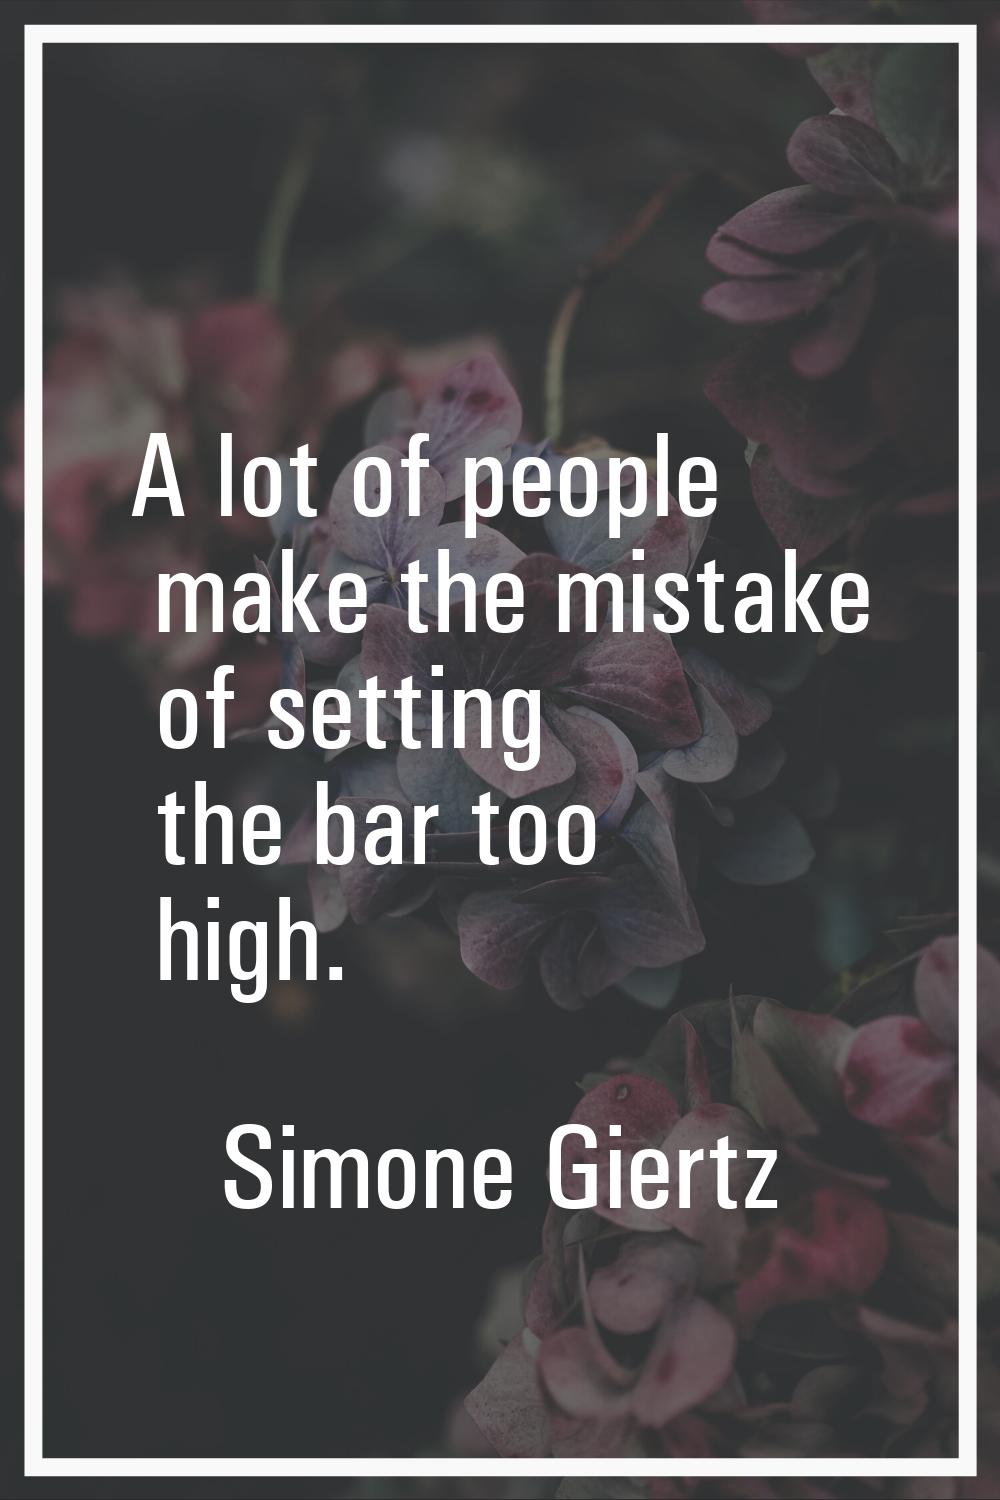 A lot of people make the mistake of setting the bar too high.